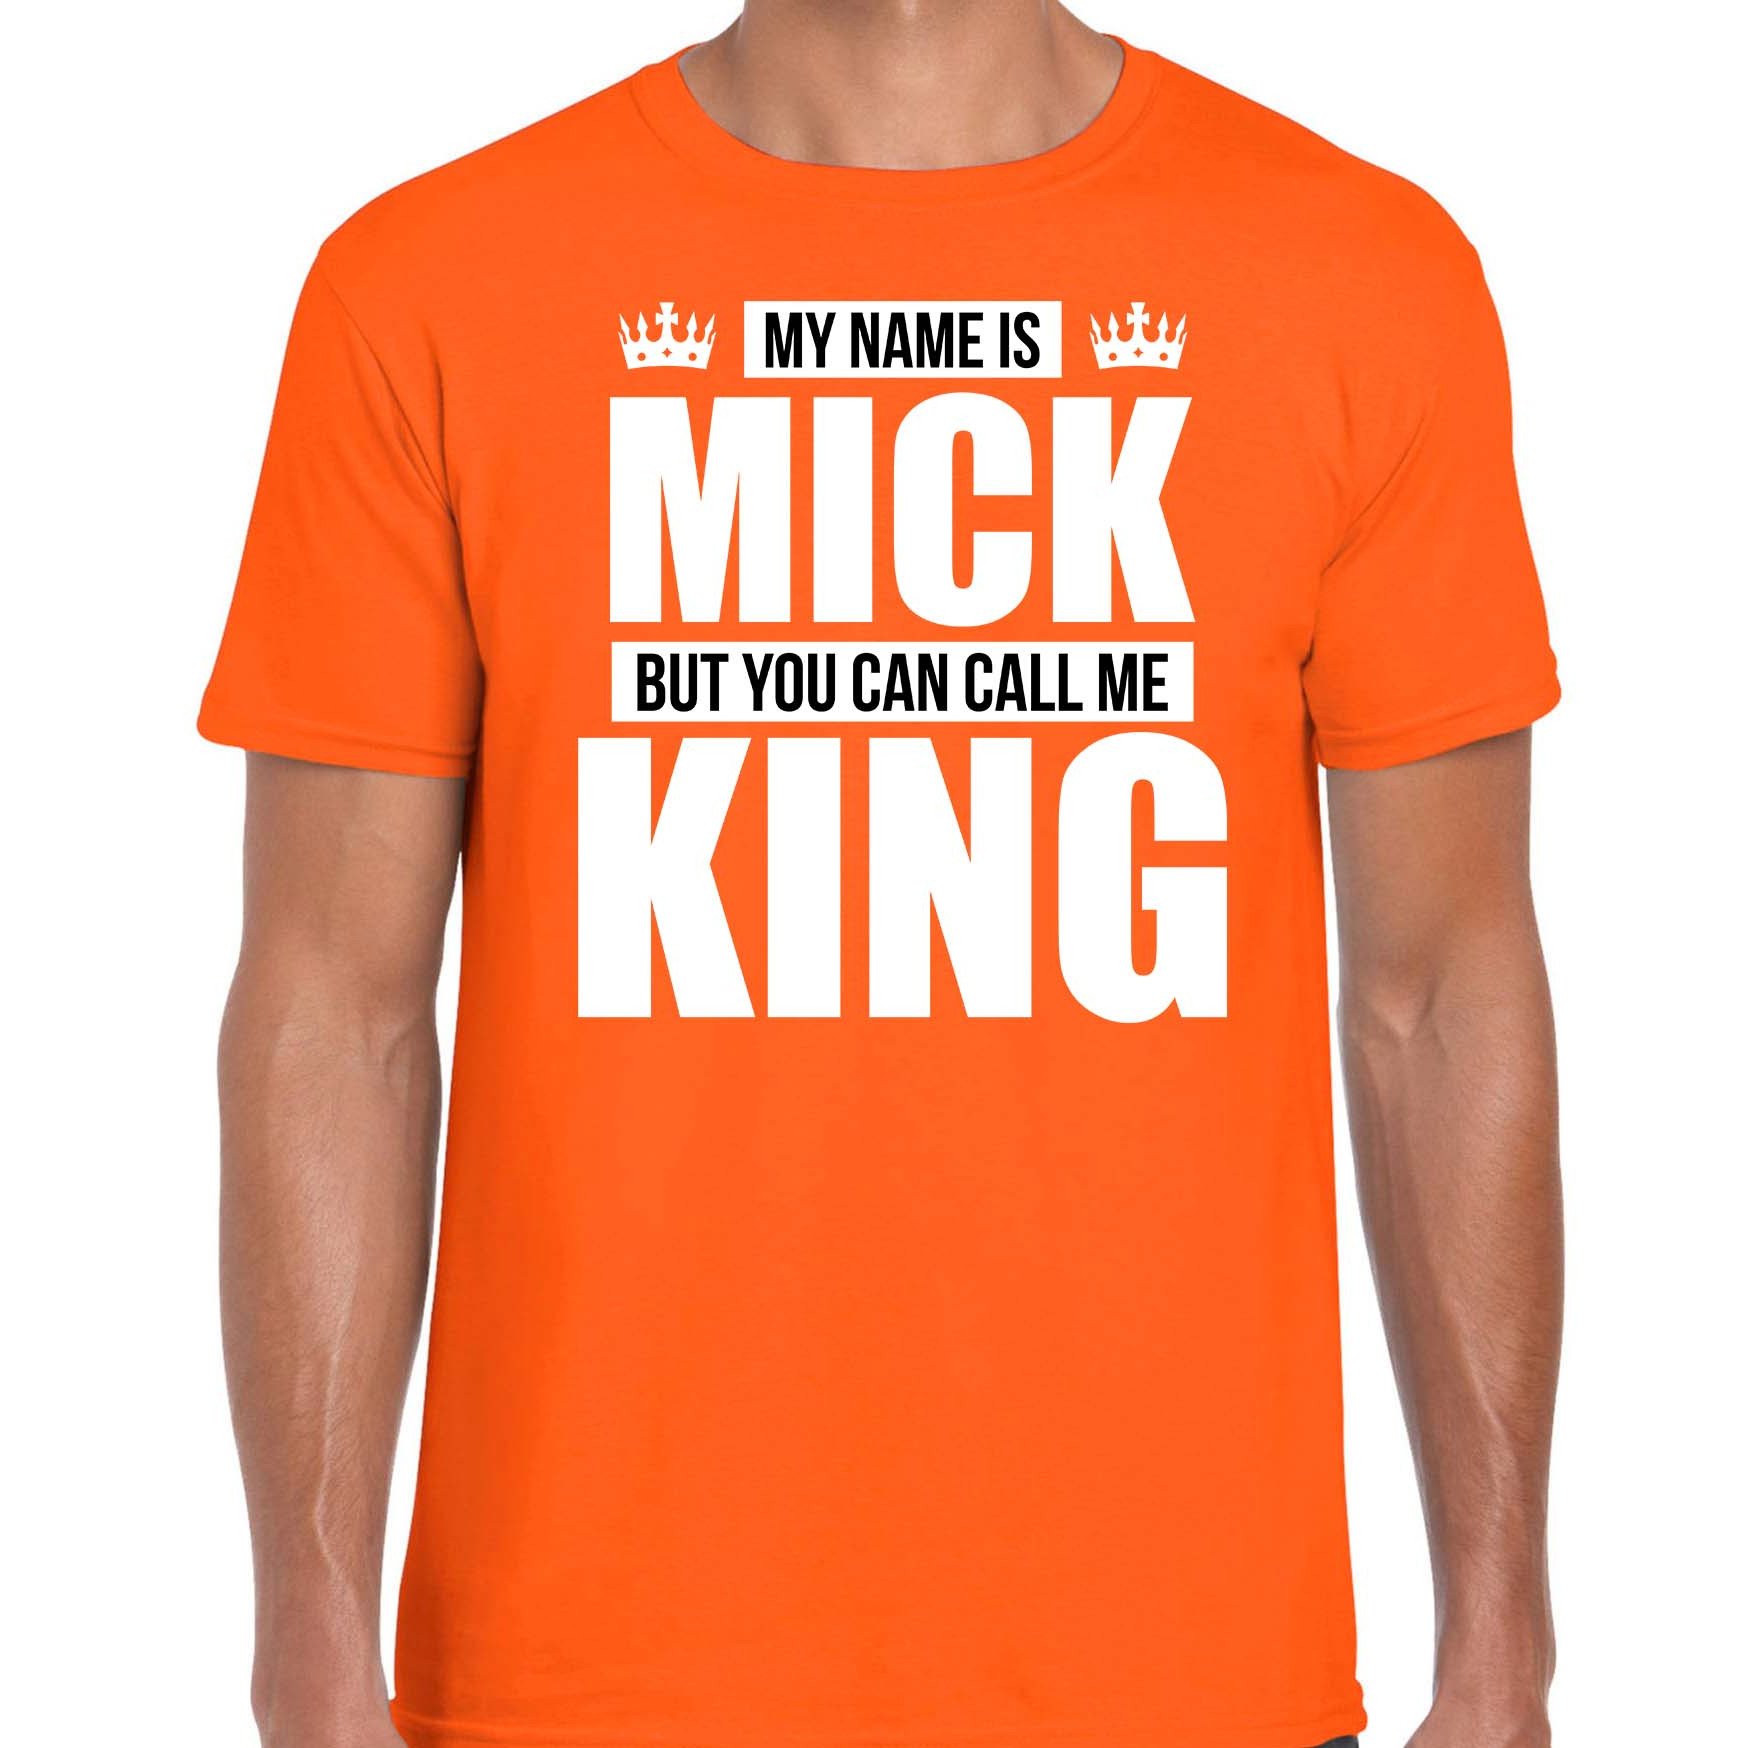 Naam cadeau t-shirt my name is Mick but you can call me King oranje voor heren